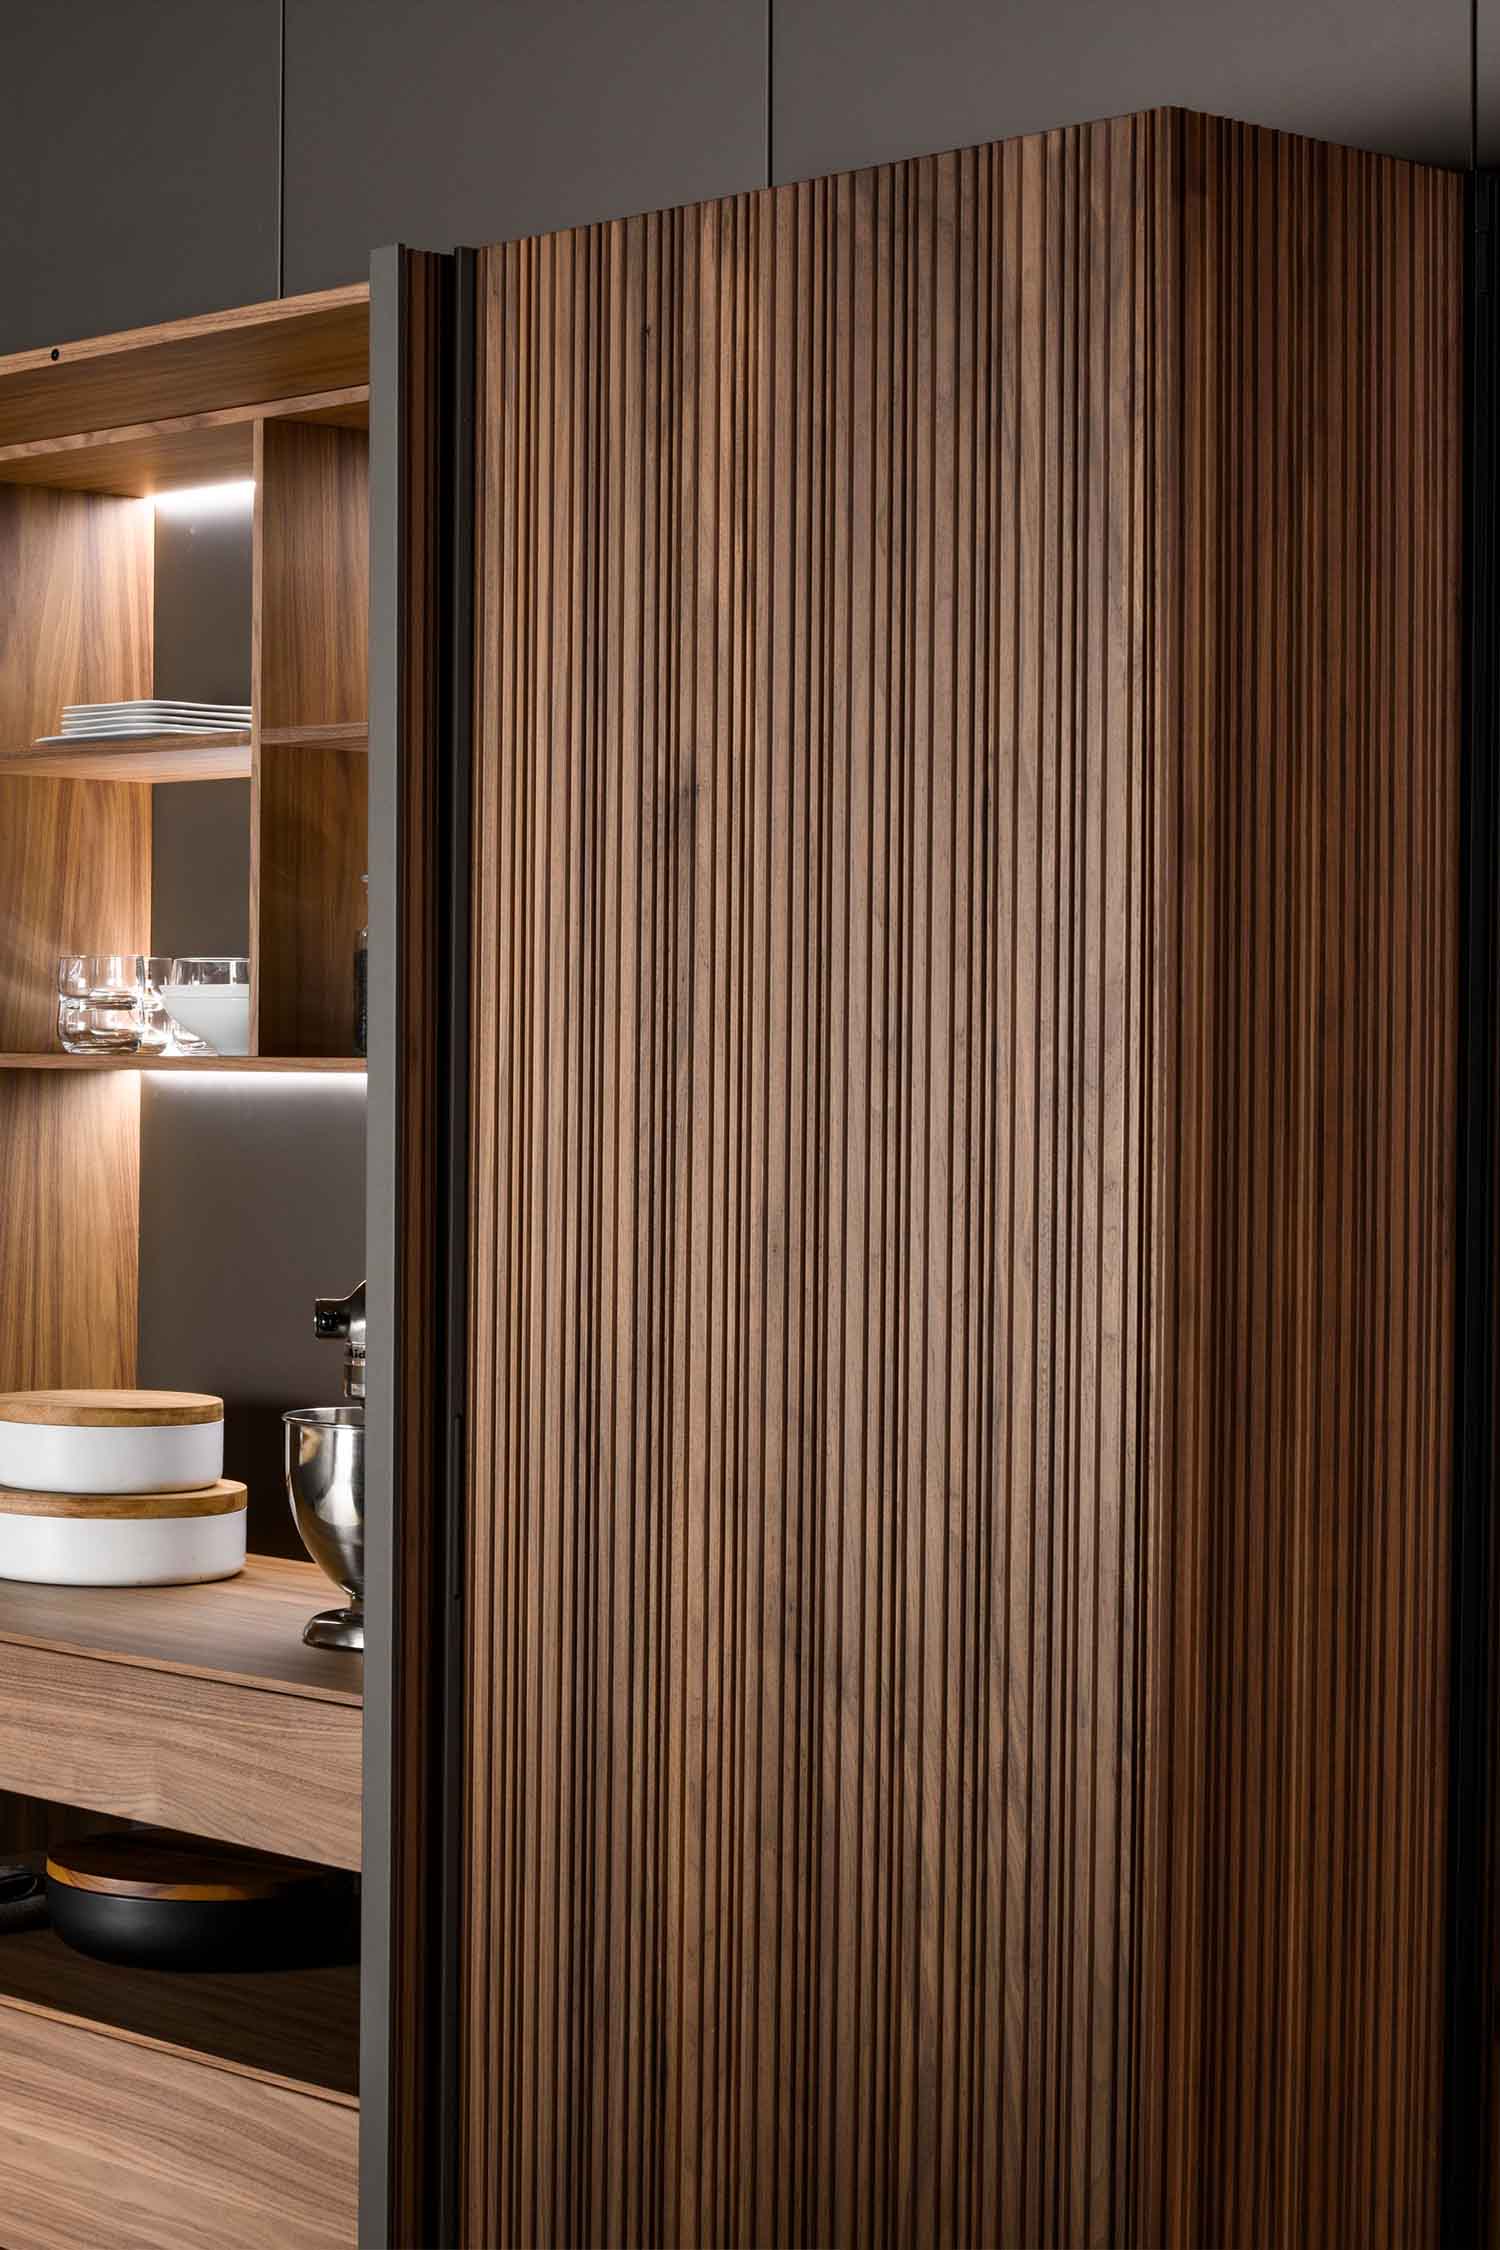 Luxurious vertically milled walnut veneer covers the kitchen wall units.